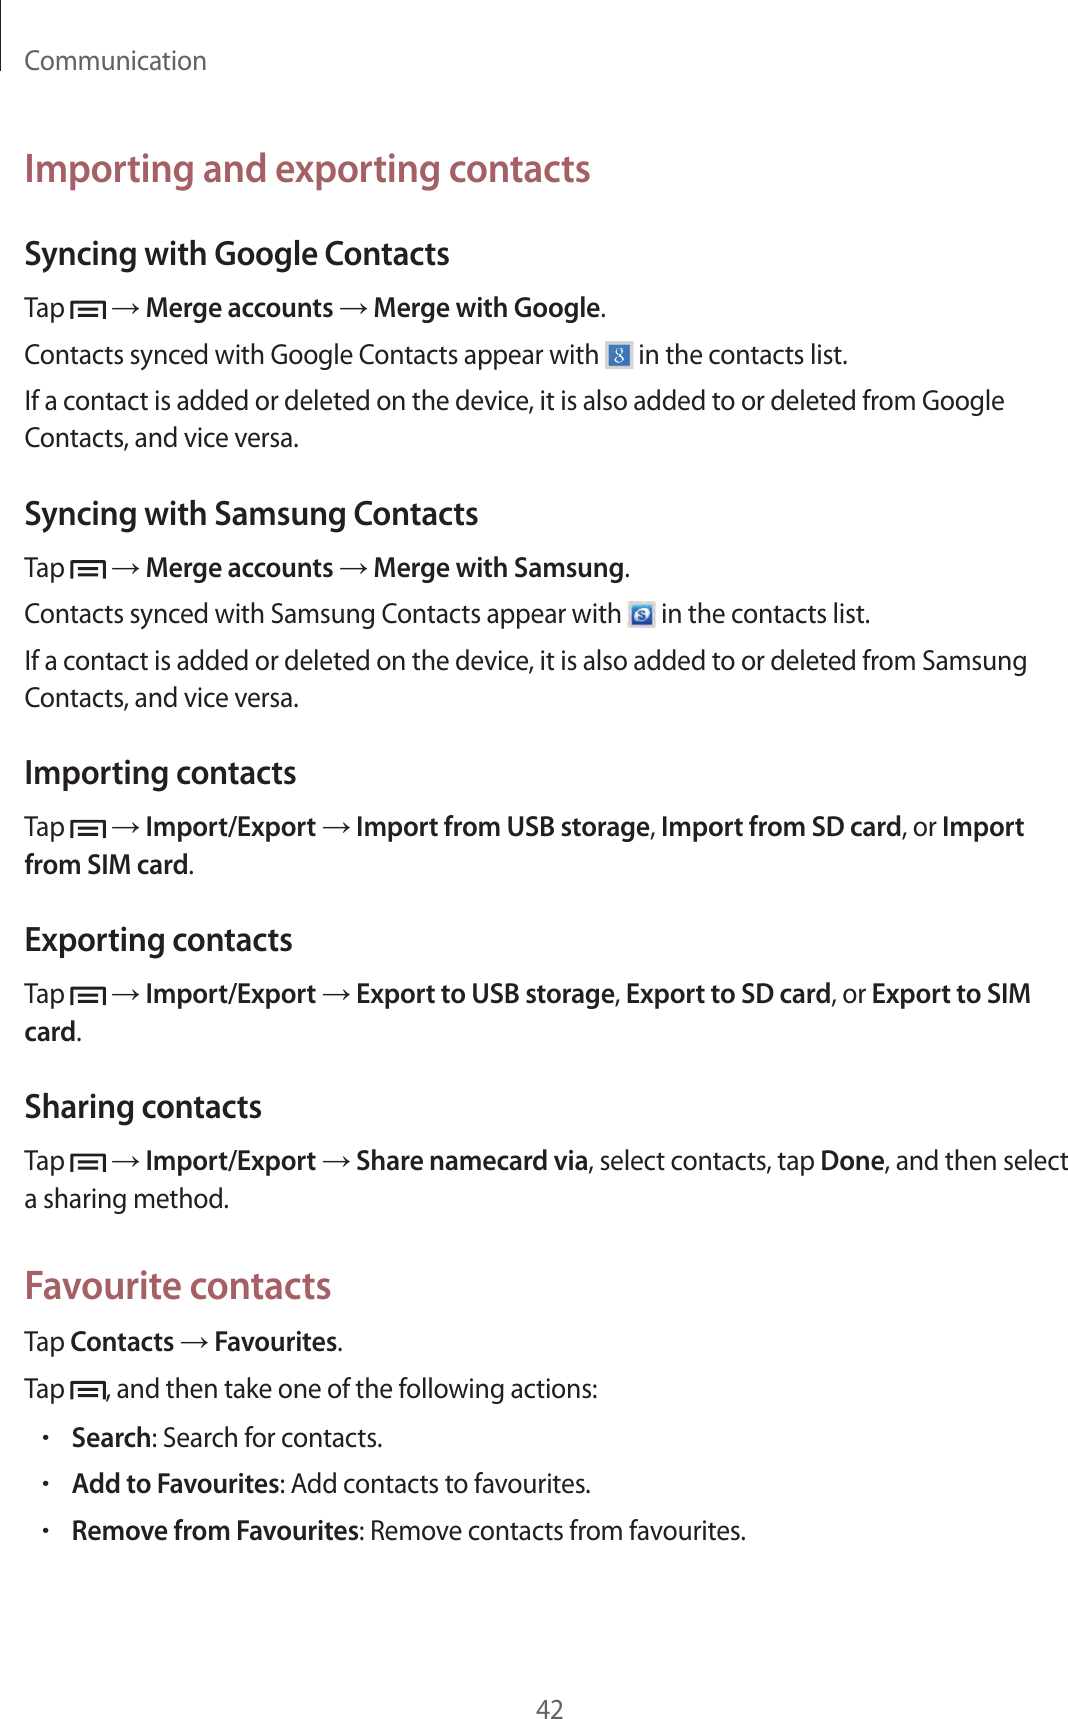 Communication42Importing and exporting contactsSyncing with Google ContactsTap   → Merge accounts → Merge with Google.Contacts synced with Google Contacts appear with   in the contacts list.If a contact is added or deleted on the device, it is also added to or deleted from Google Contacts, and vice versa.Syncing with Samsung ContactsTap   → Merge accounts → Merge with Samsung.Contacts synced with Samsung Contacts appear with   in the contacts list.If a contact is added or deleted on the device, it is also added to or deleted from Samsung Contacts, and vice versa.Importing contactsTap   → Import/Export → Import from USB storage, Import from SD card, or Import from SIM card.Exporting contactsTap   → Import/Export → Export to USB storage, Export to SD card, or Export to SIM card.Sharing contactsTap   → Import/Export → Share namecard via, select contacts, tap Done, and then select a sharing method.Favourite contactsTap Contacts → Favourites.Tap  , and then take one of the following actions:•Search: Search for contacts.•Add to Favourites: Add contacts to favourites.•Remove from Favourites: Remove contacts from favourites.